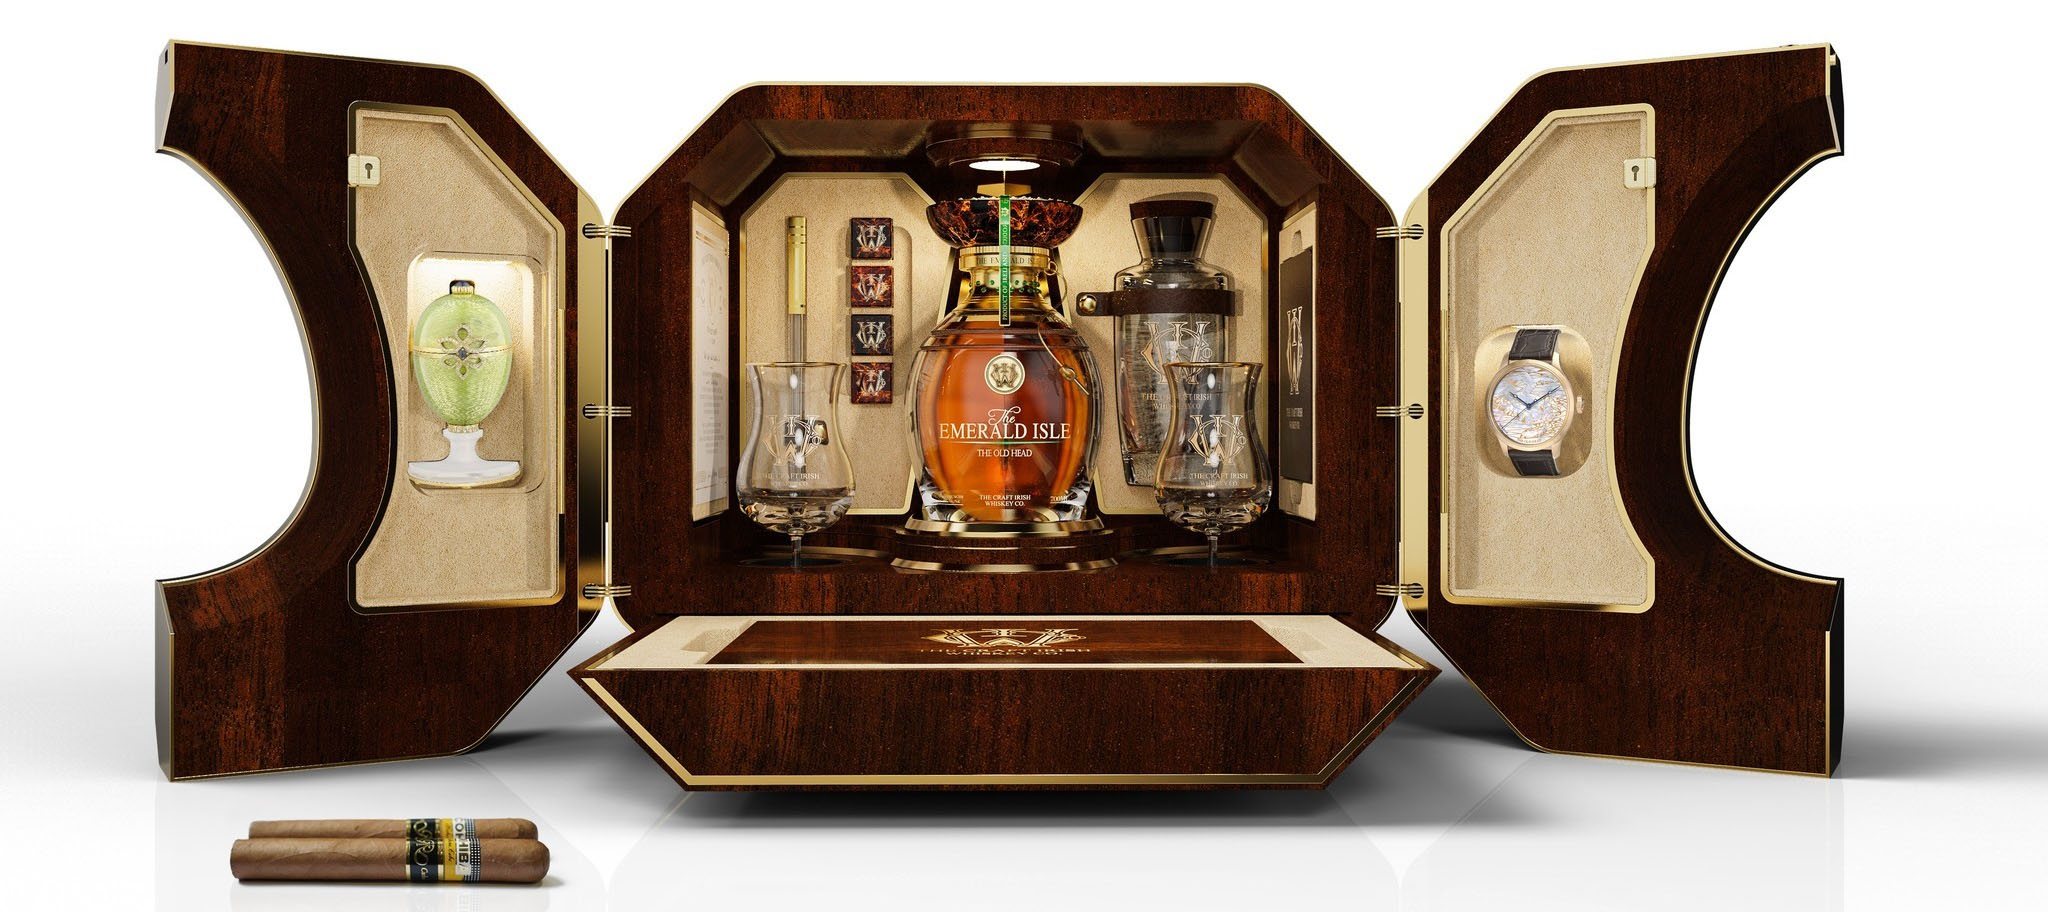 The Emerald Isle Collection - World's Most Expensive Whiskey Collection